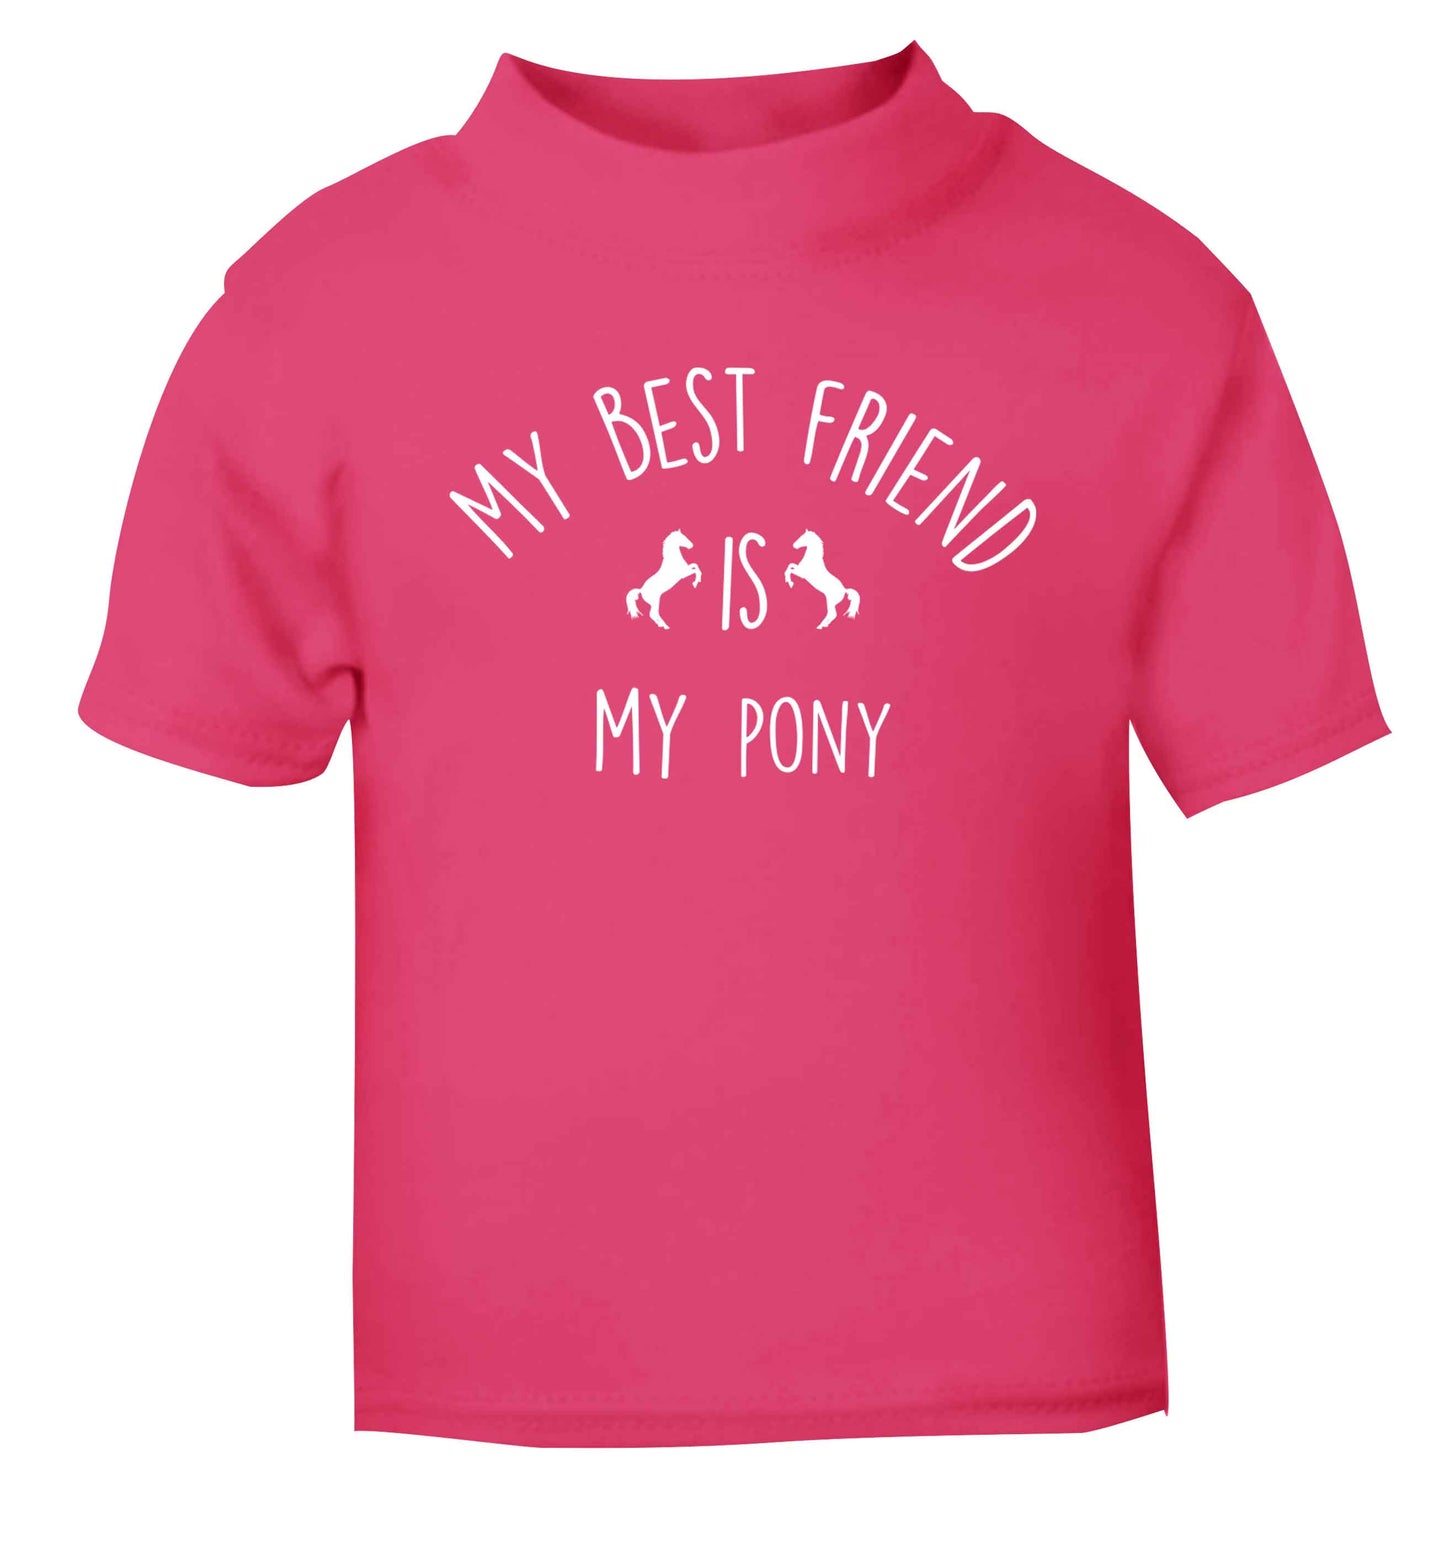 My best friend is my pony pink baby toddler Tshirt 2 Years